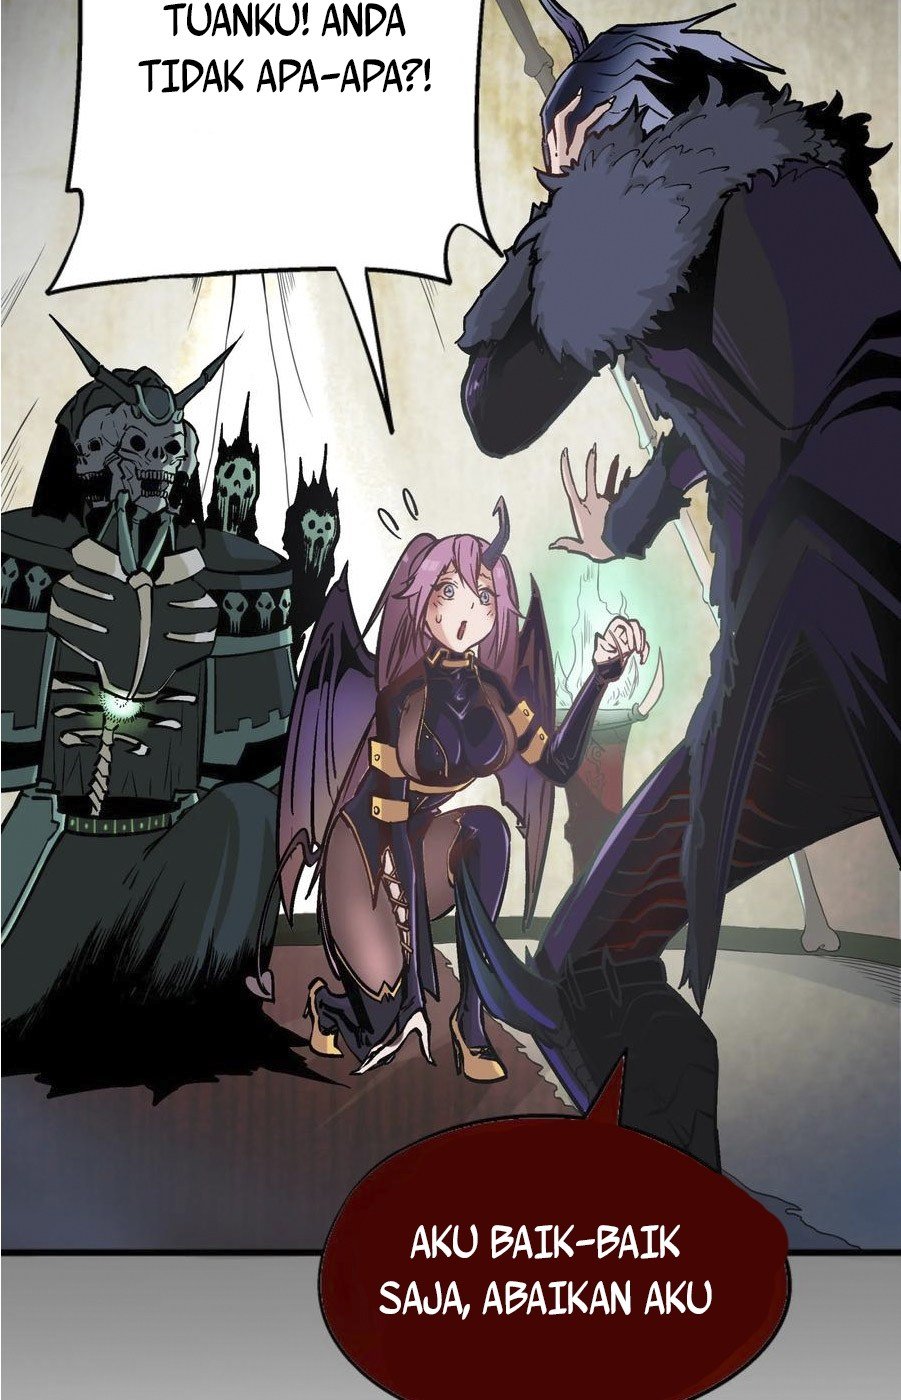 I’m Not The Overlord Chapter 01